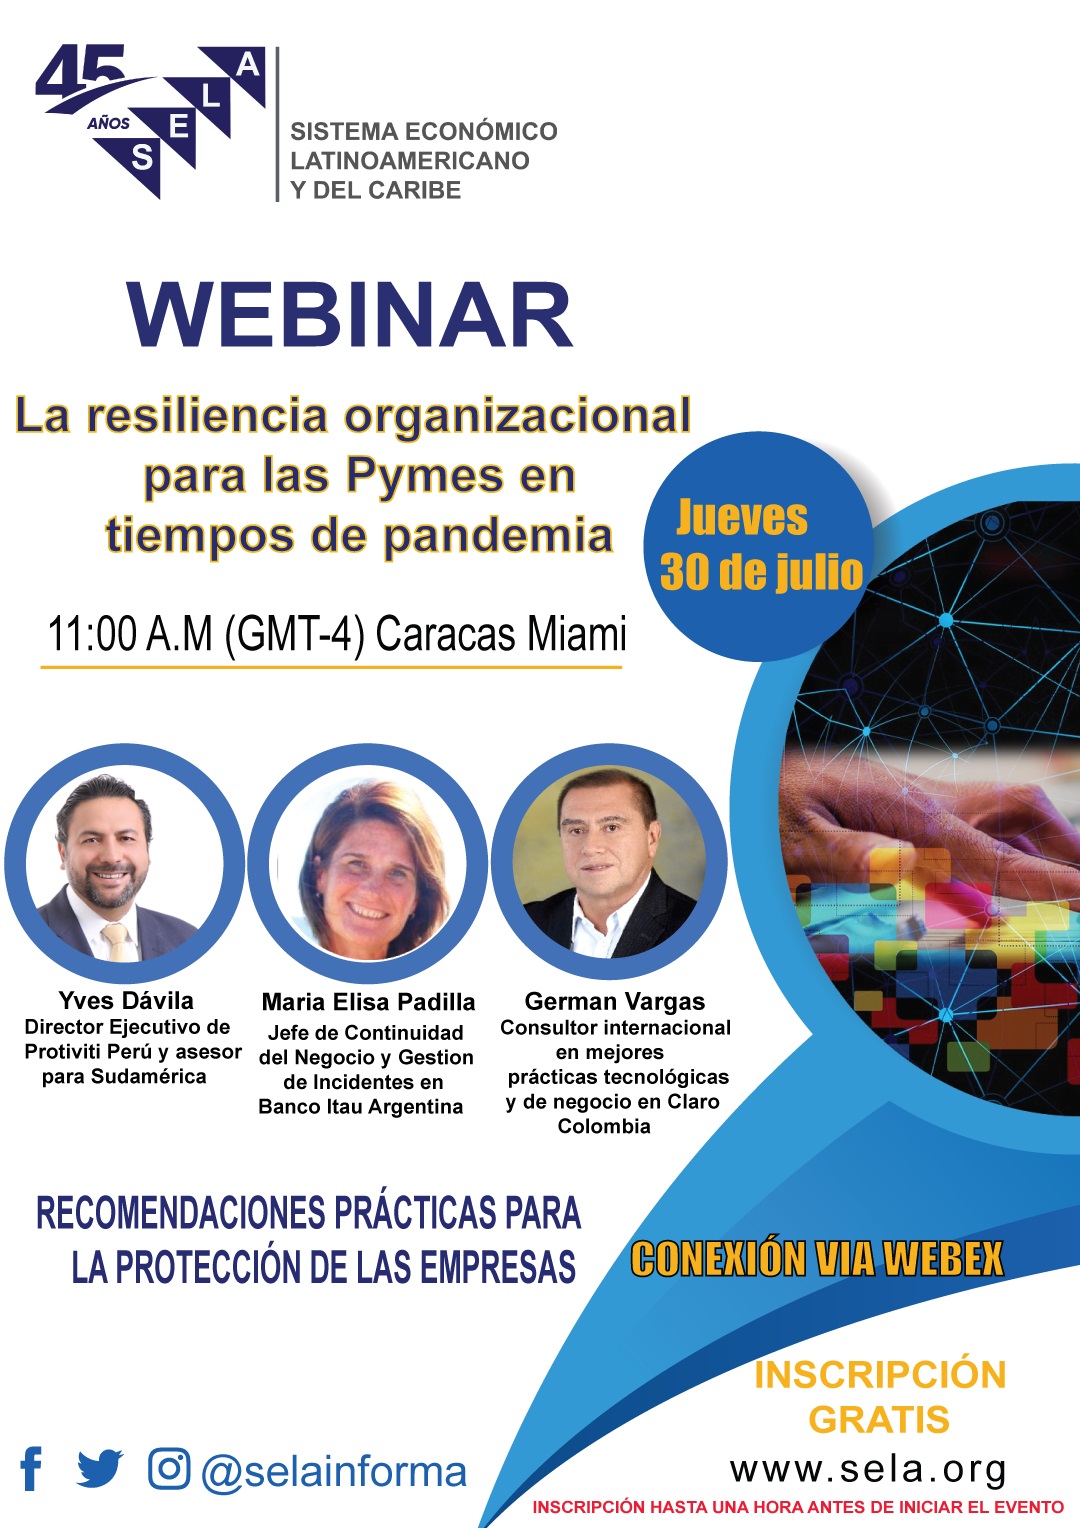 SELA Webinar to deal with organizational resilience for SMEs in times of pandemic